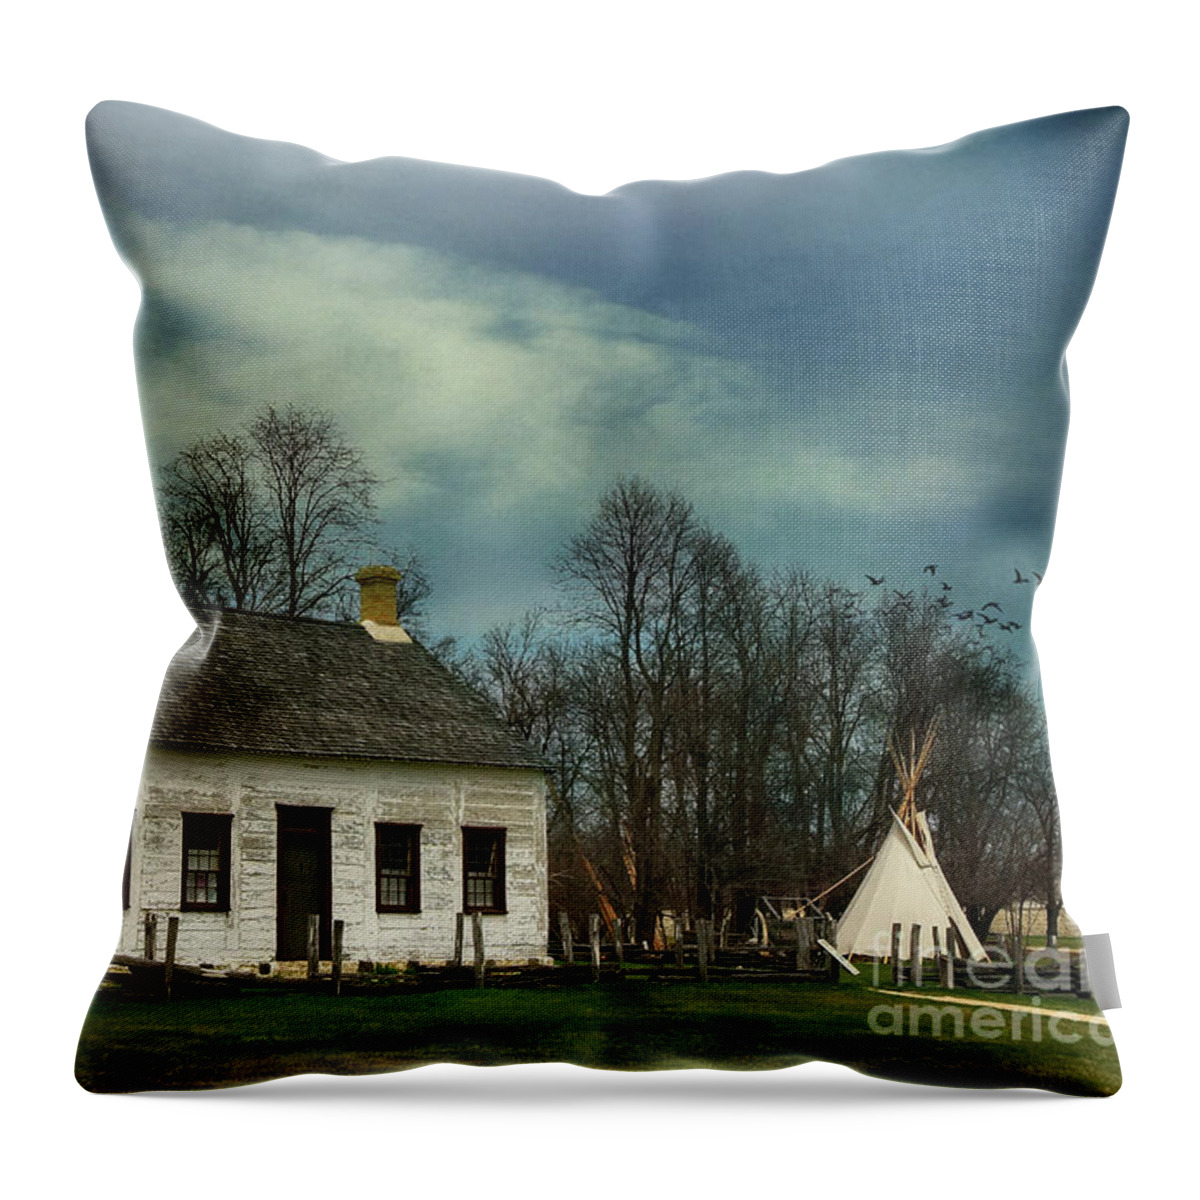 Building Throw Pillow featuring the photograph Fraser House In Lower Fort Garry by Teresa Zieba